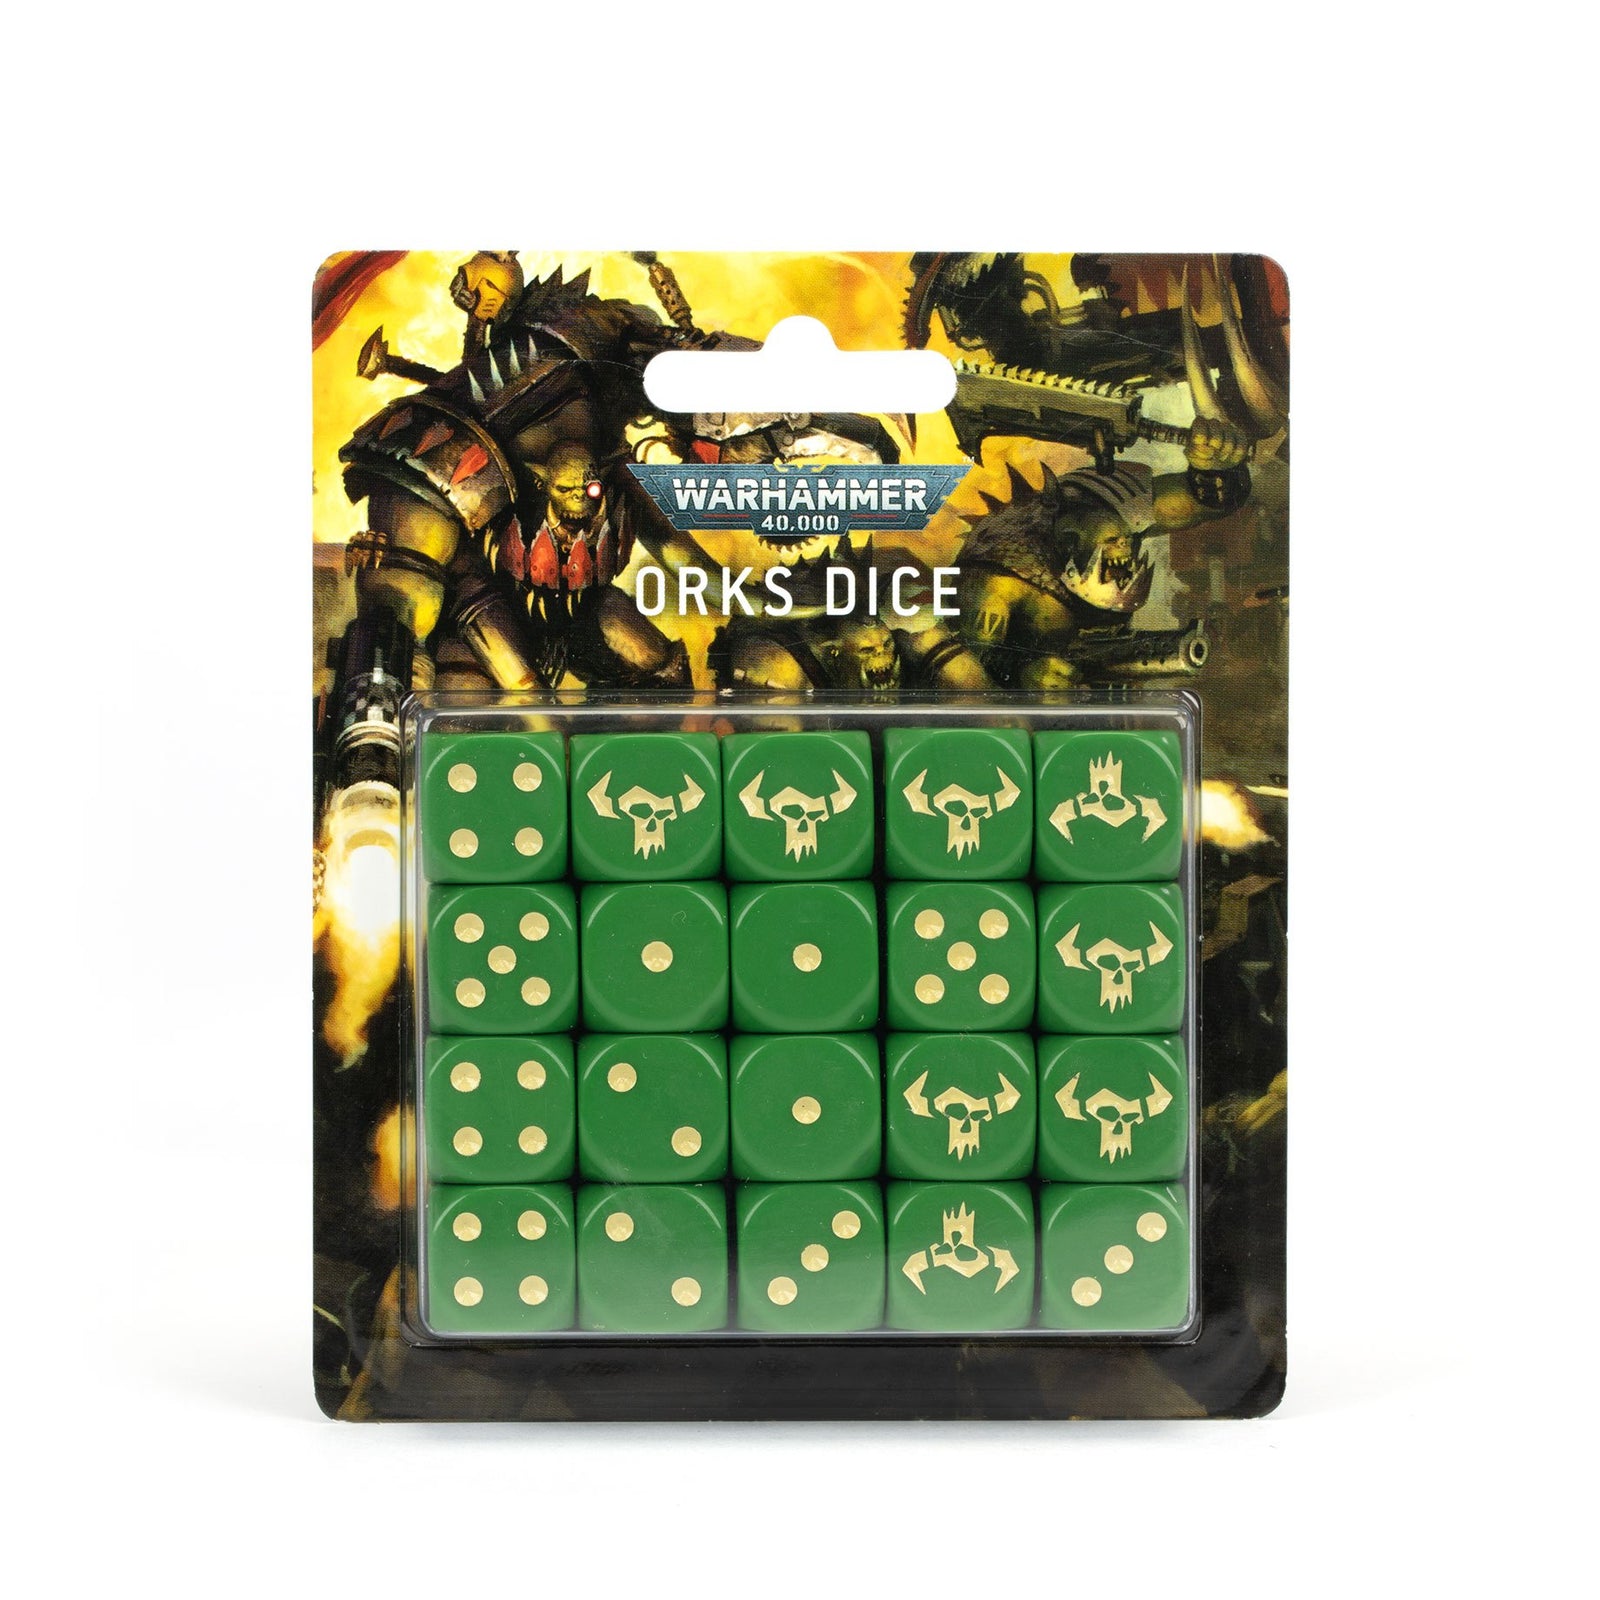 Product image for 40K Orks Dice